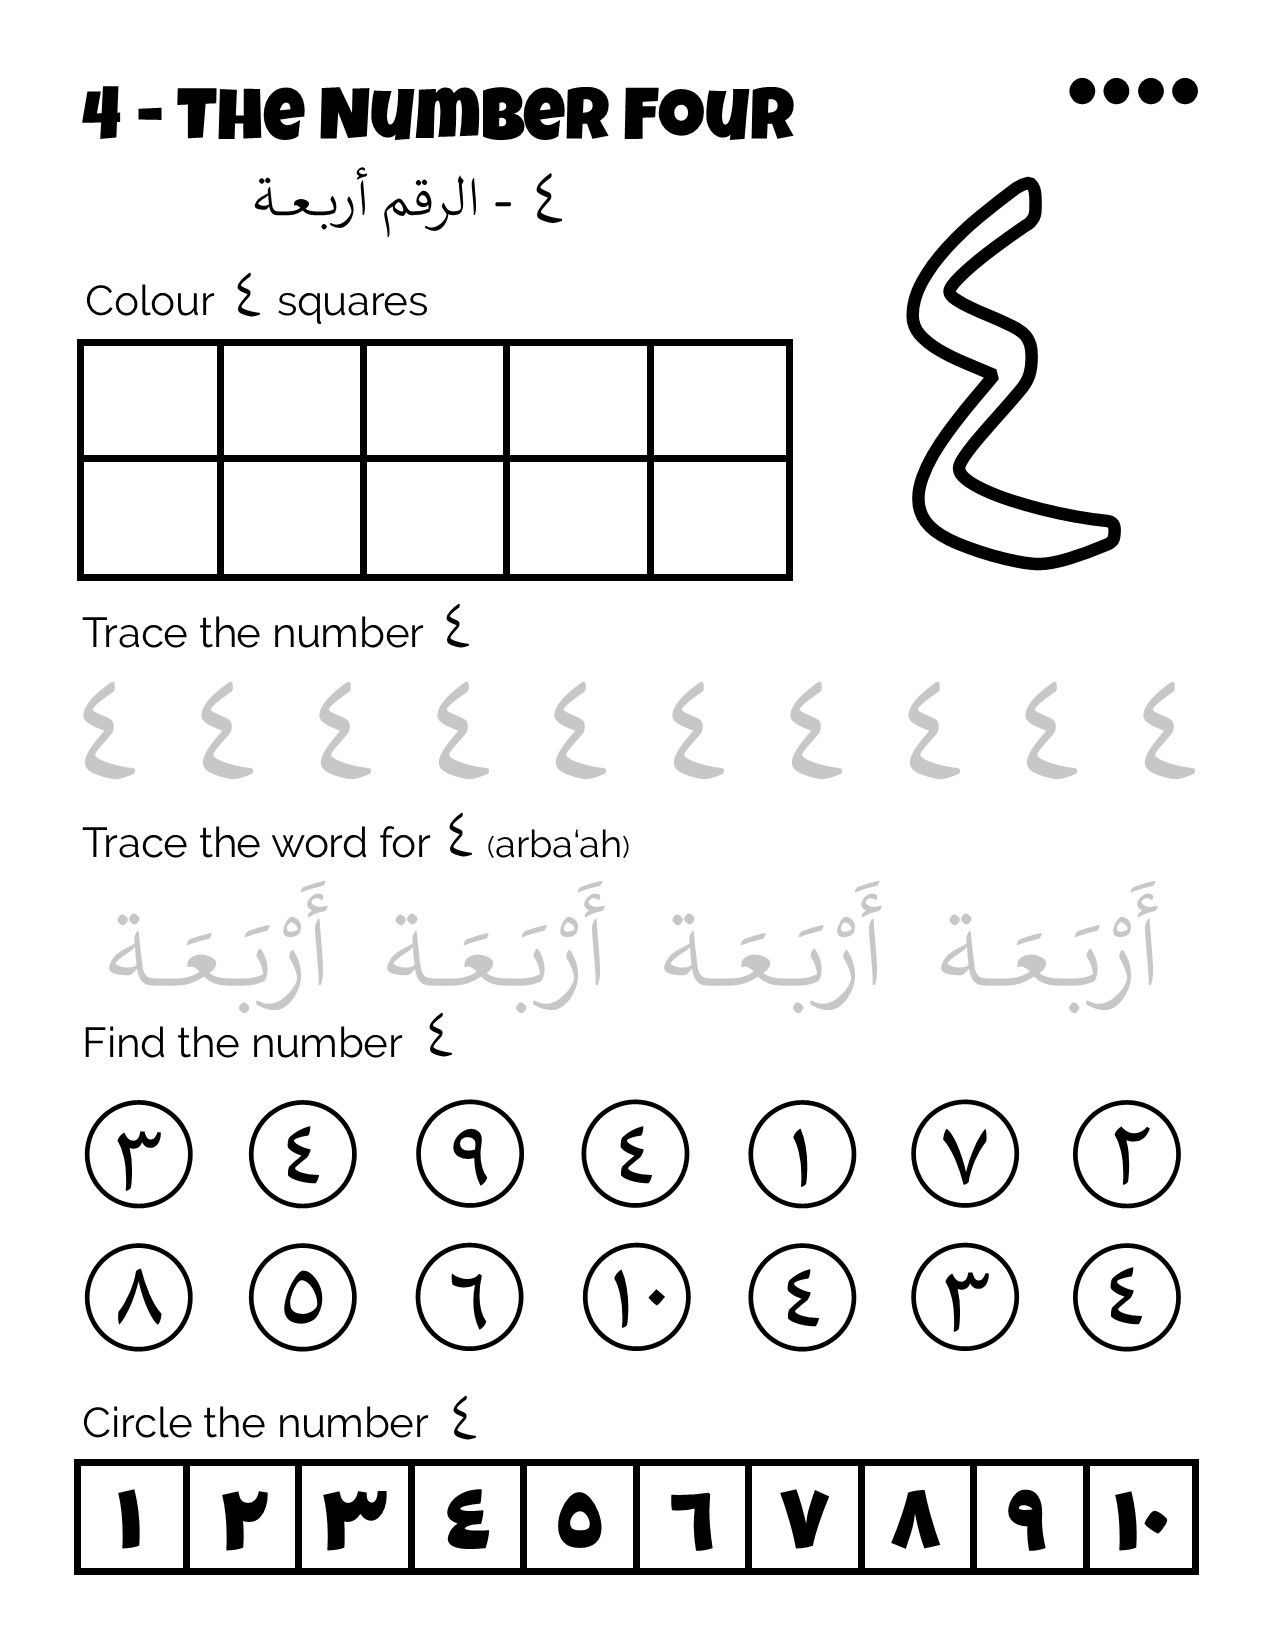 Arabic Numbers 1-10 Worksheets | Arabic Alphabet For Kids